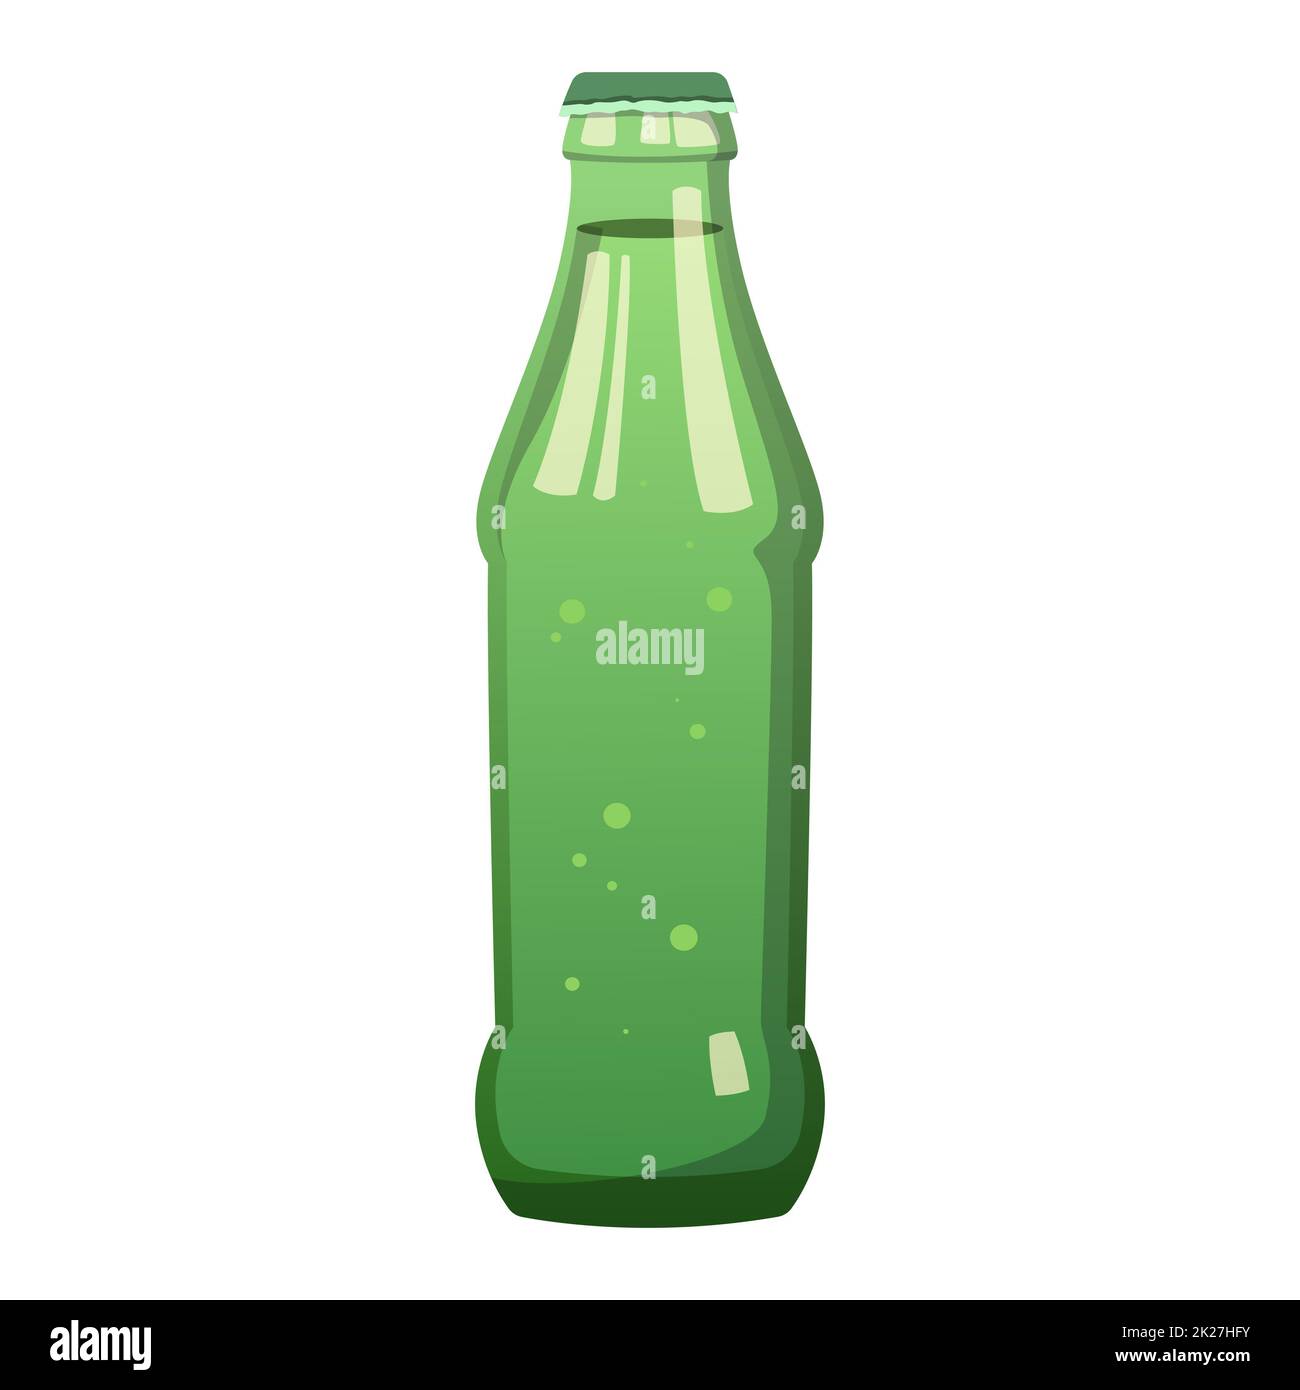 Soda bottle Cut Out Stock Images & Pictures - Alamy